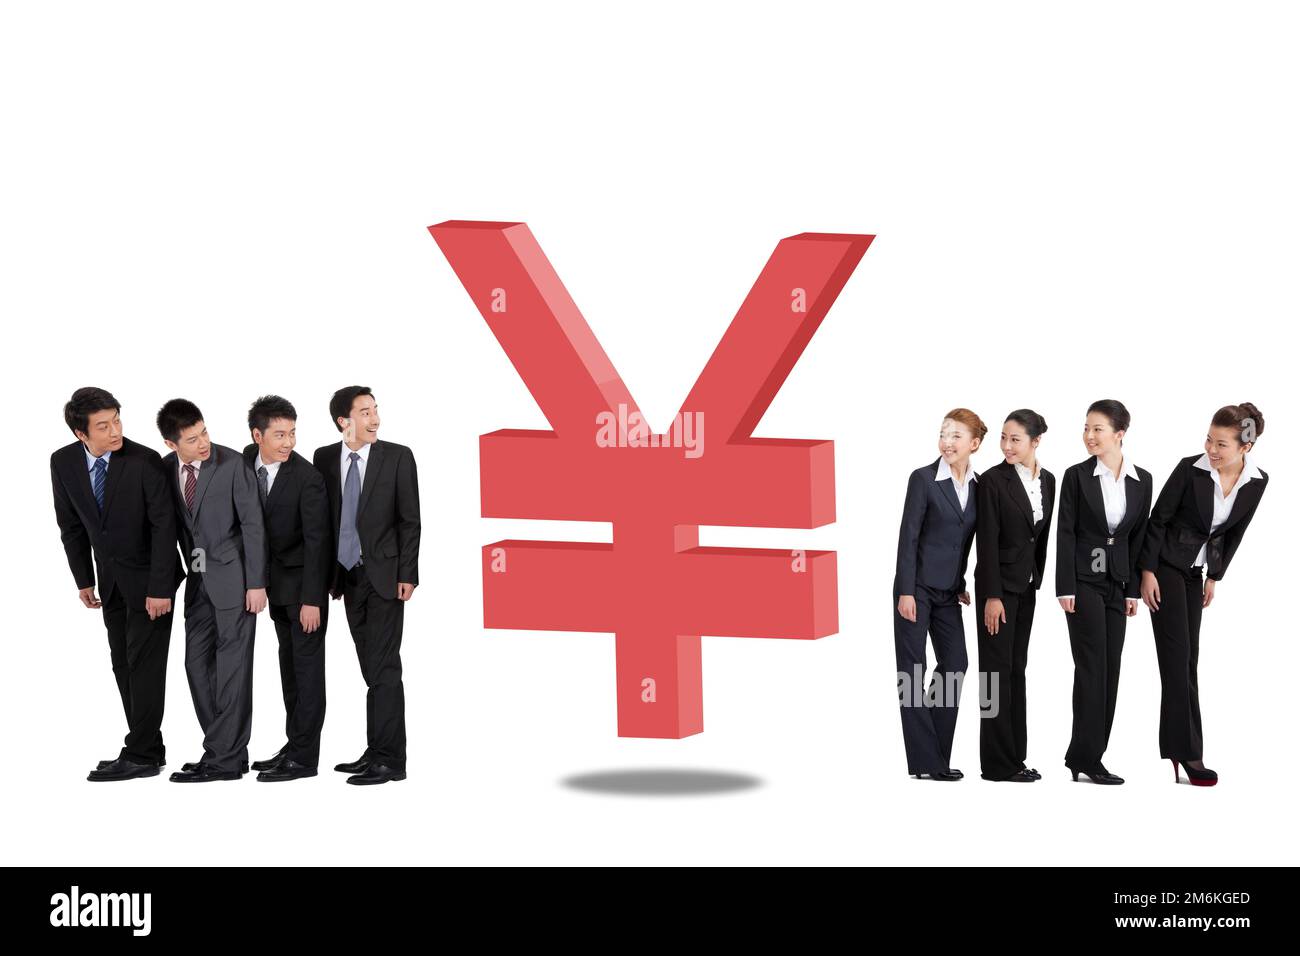 Business team and finance symbols Stock Photo